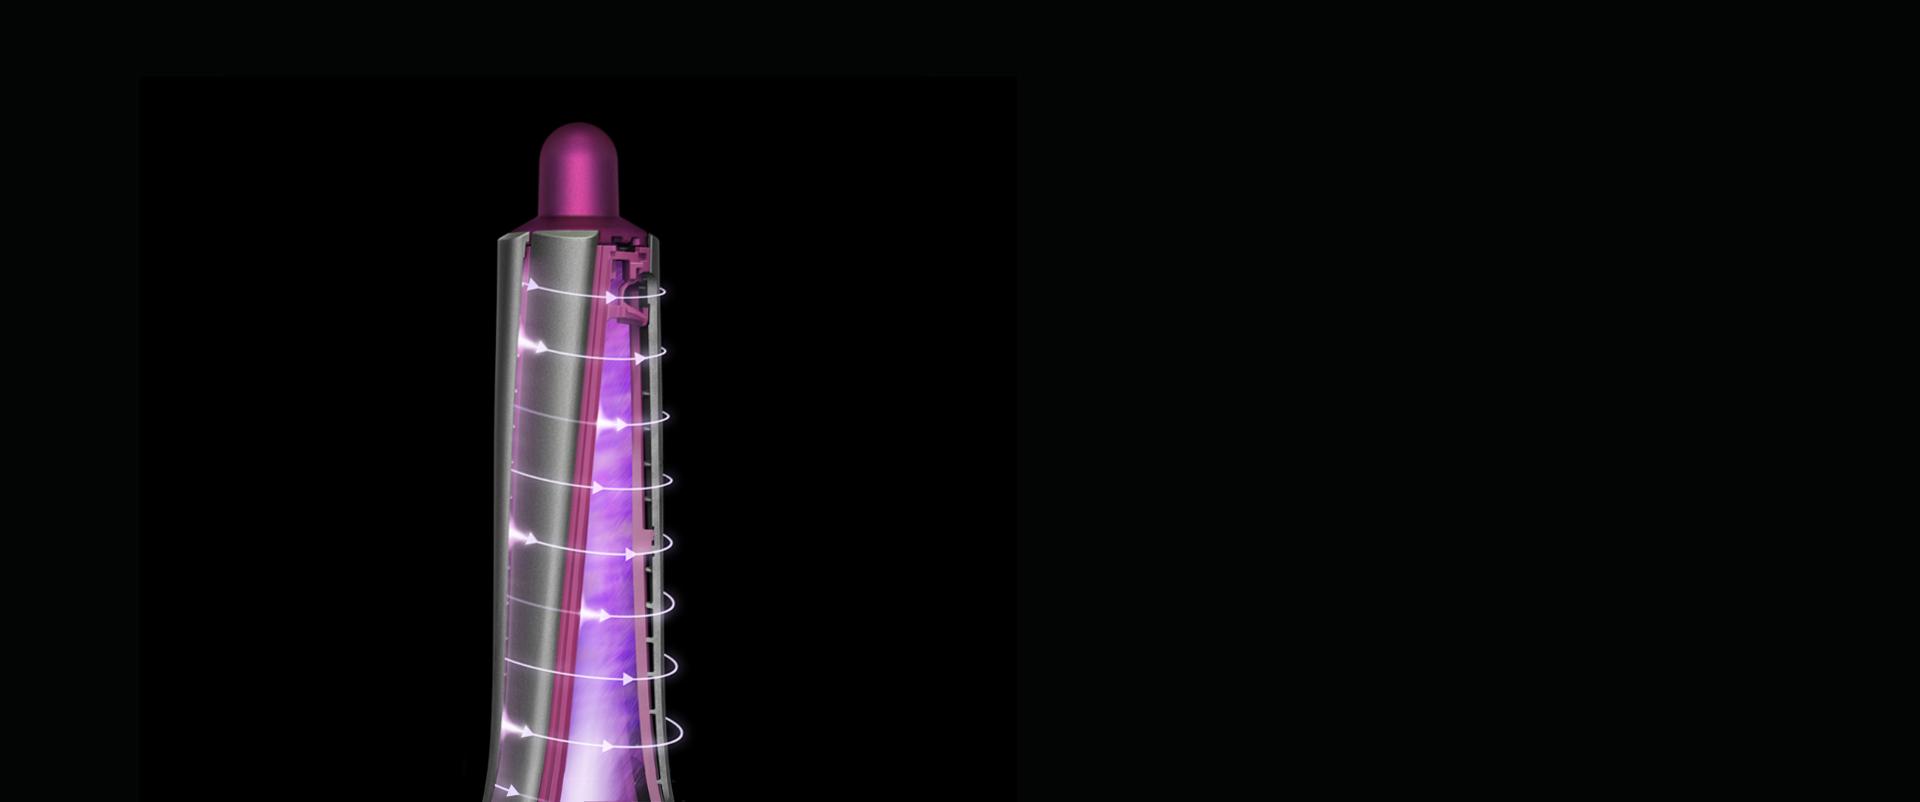 Video demonstration of airflow around the Dyson Airwrap™ hair styler